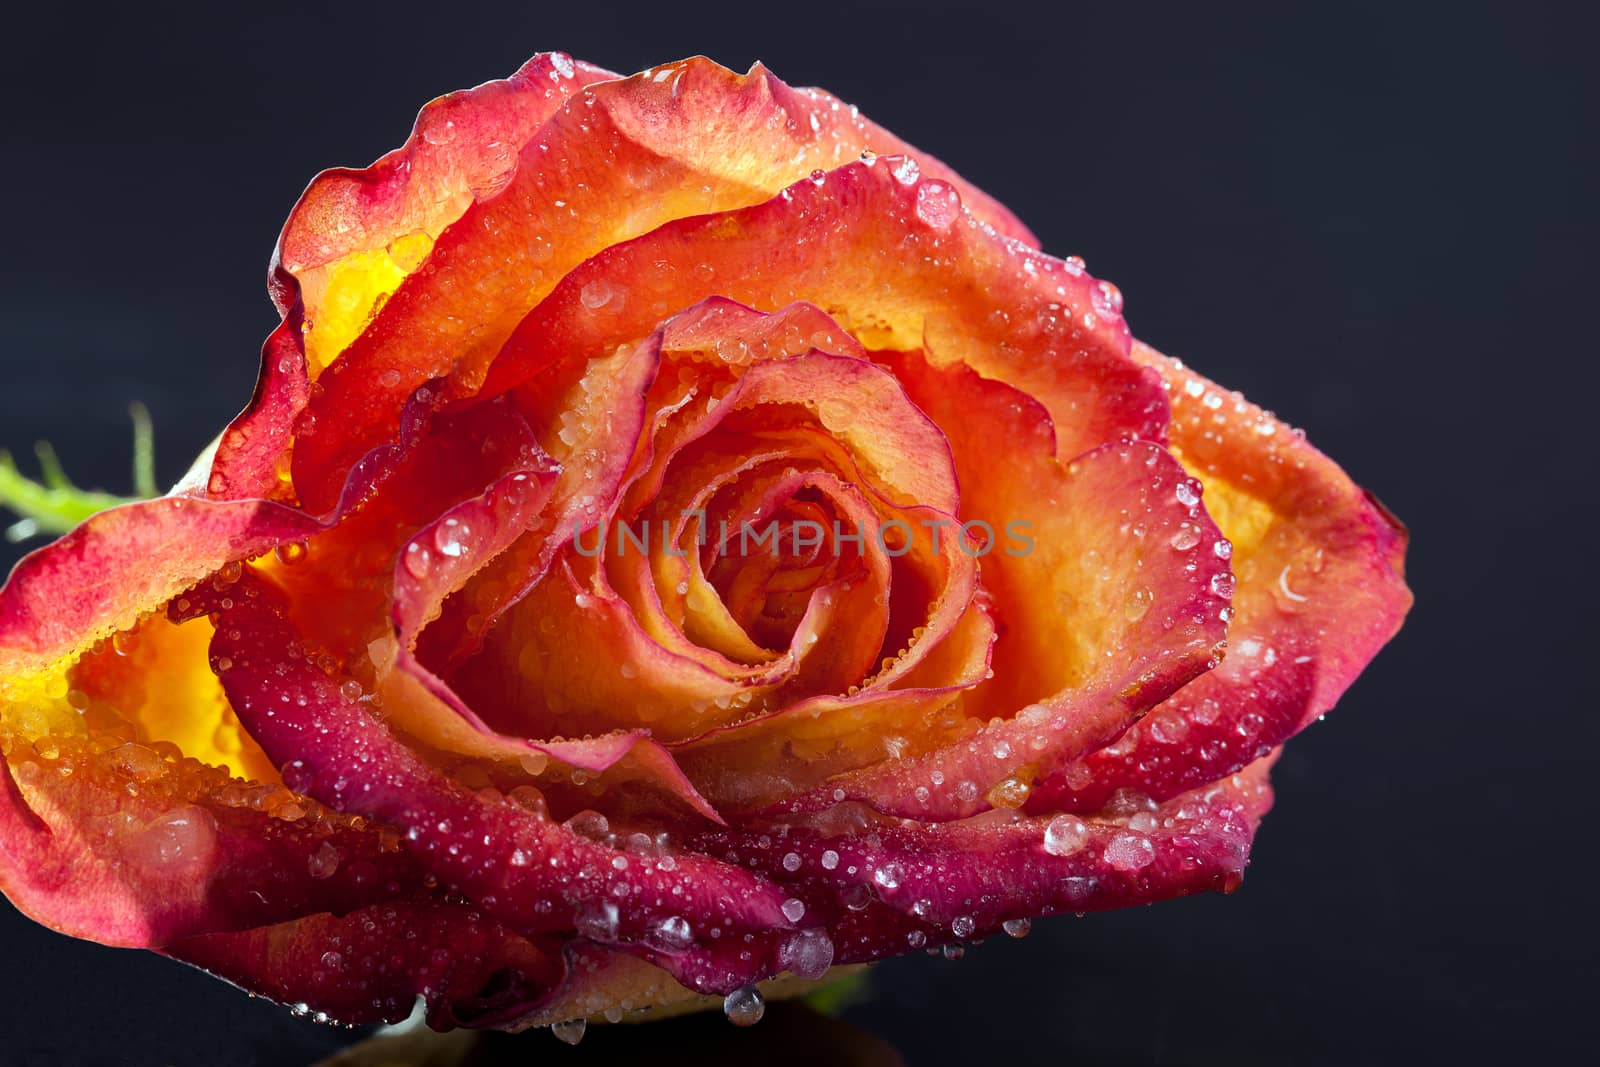 single frozen flower of rose isolated on a black background - macro by mychadre77